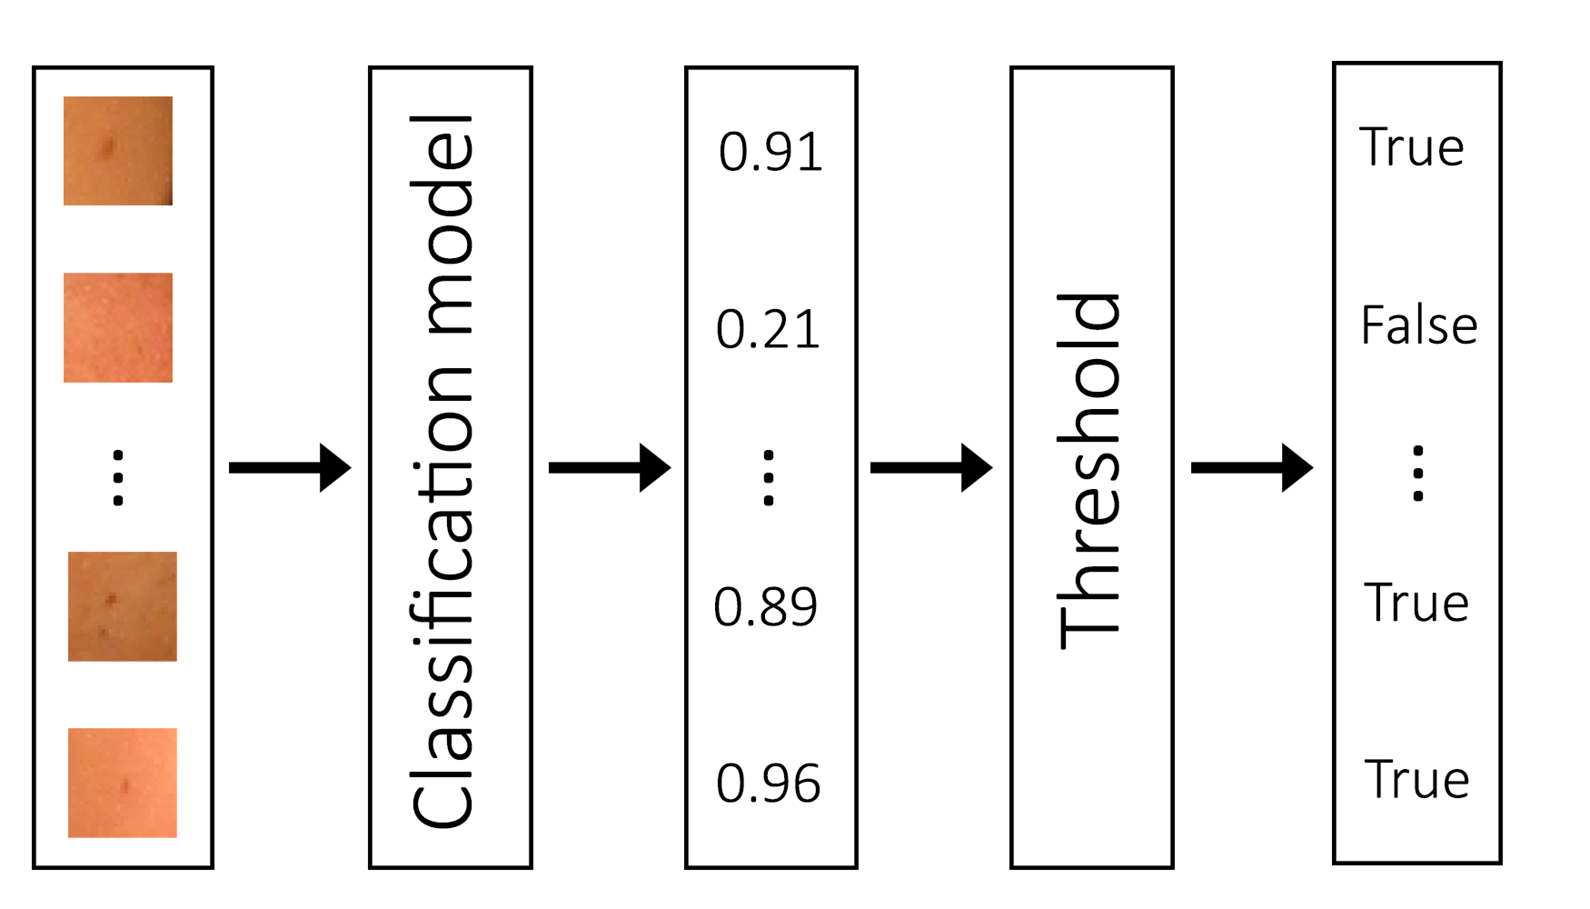 Figure 1: Process of facial mark recognition. The model assigns a probability score to an image, and a threshold decides if it is &lsquo;True&rsquo; or &lsquo;False&rsquo;